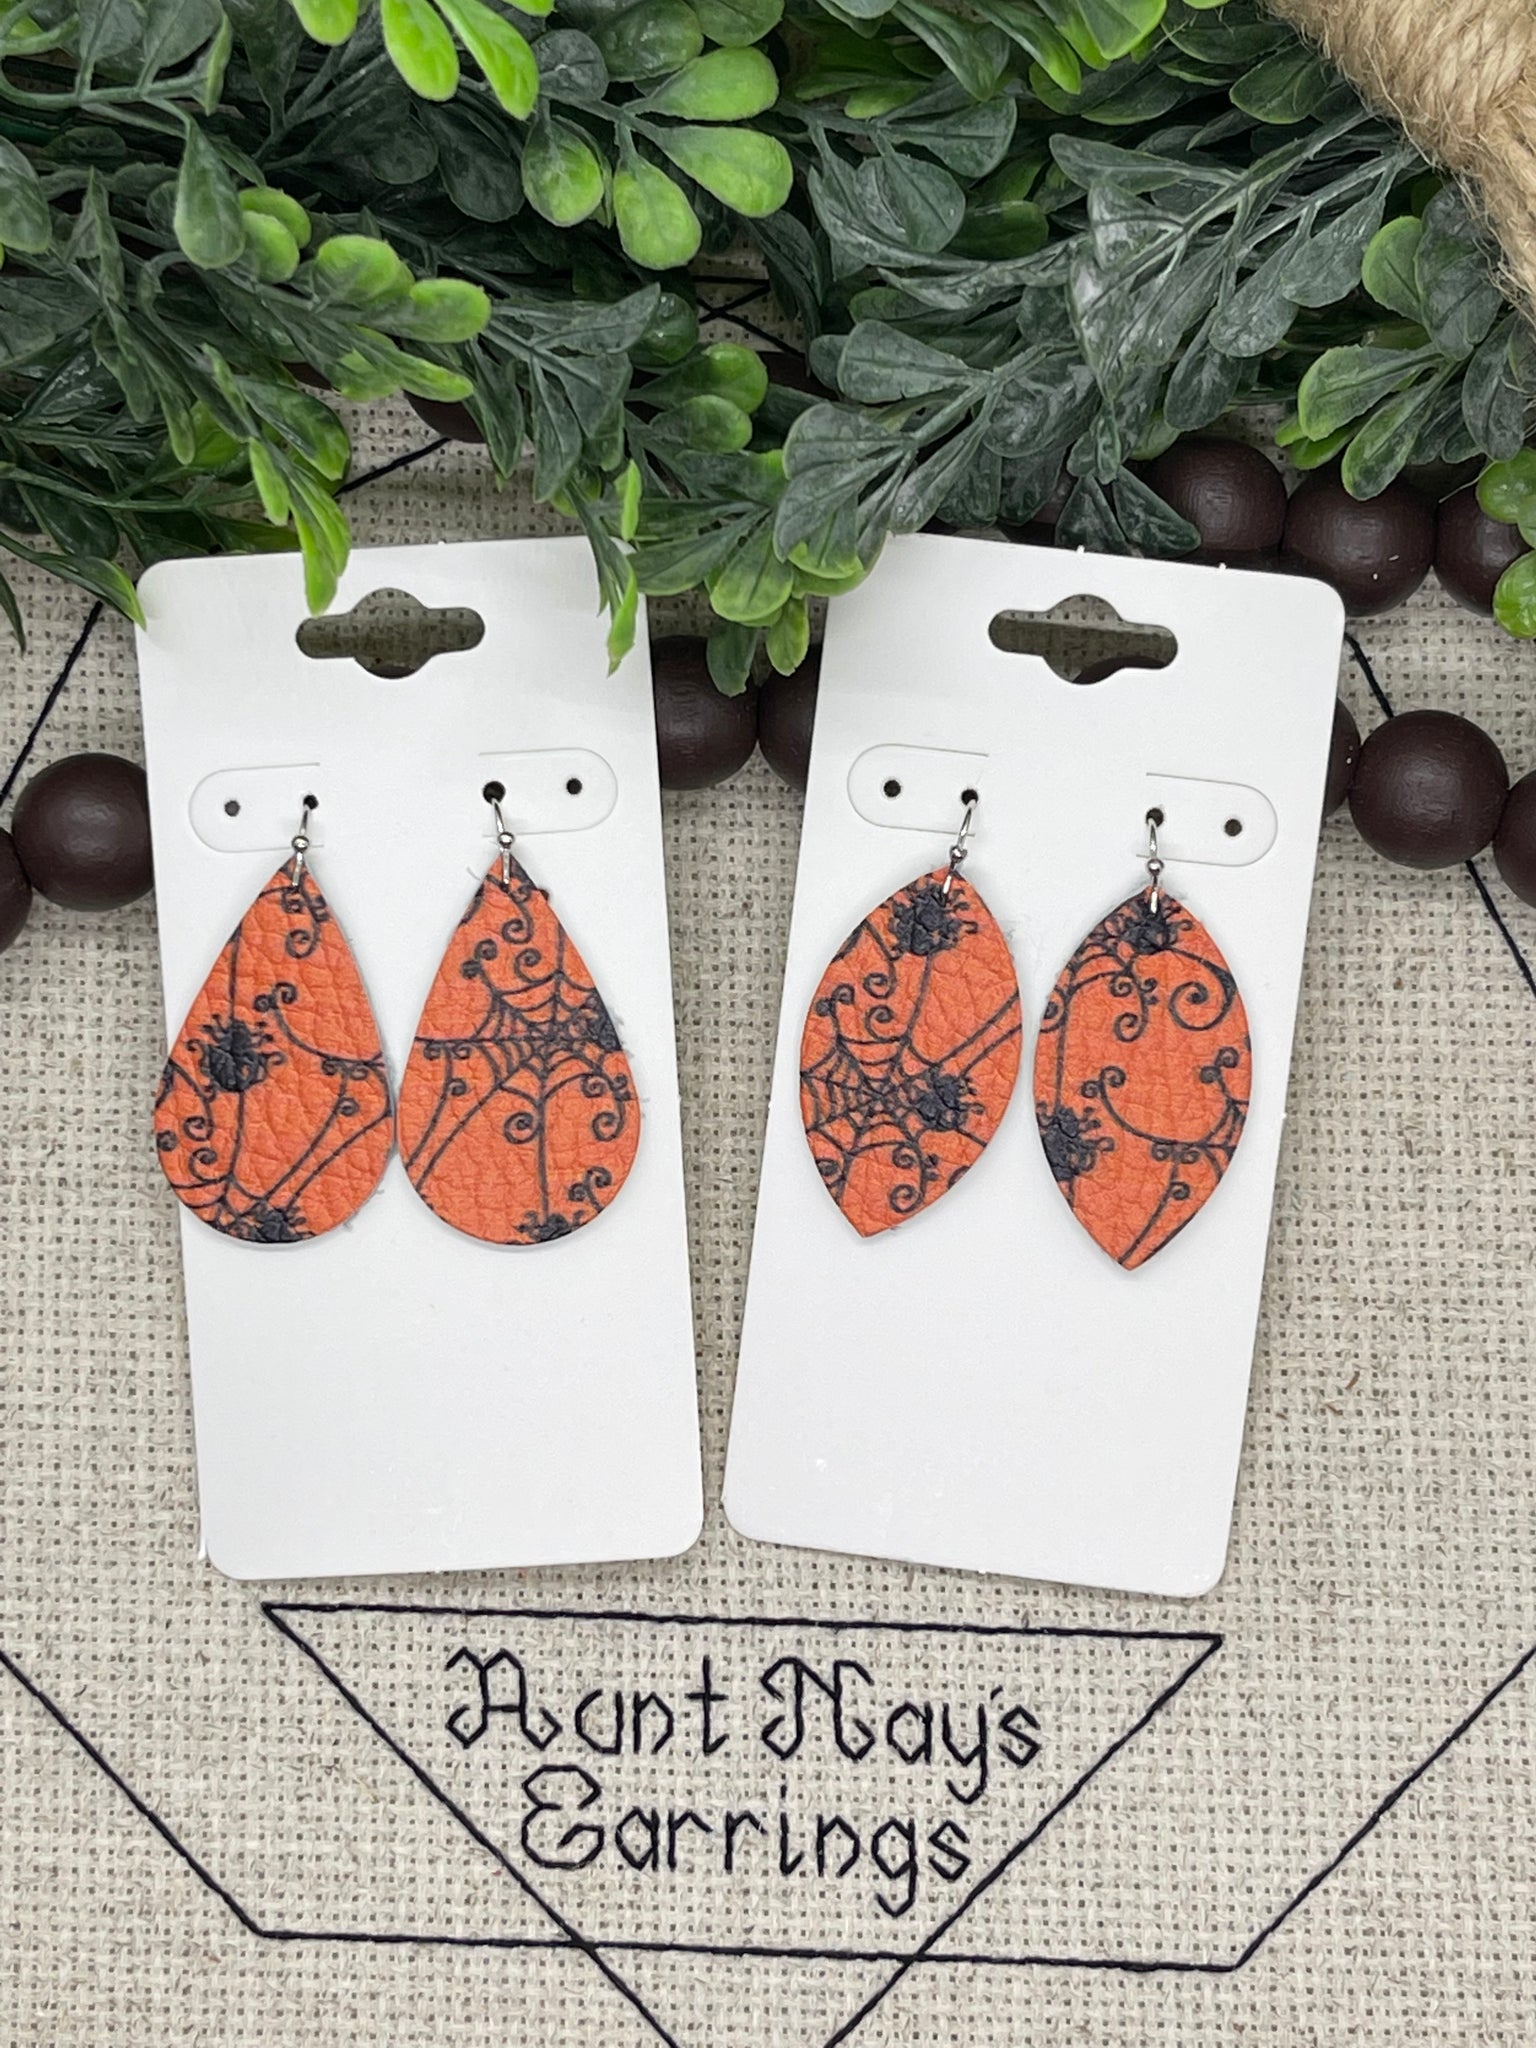 Orange Leather with Black Webs and Spiders Earrings